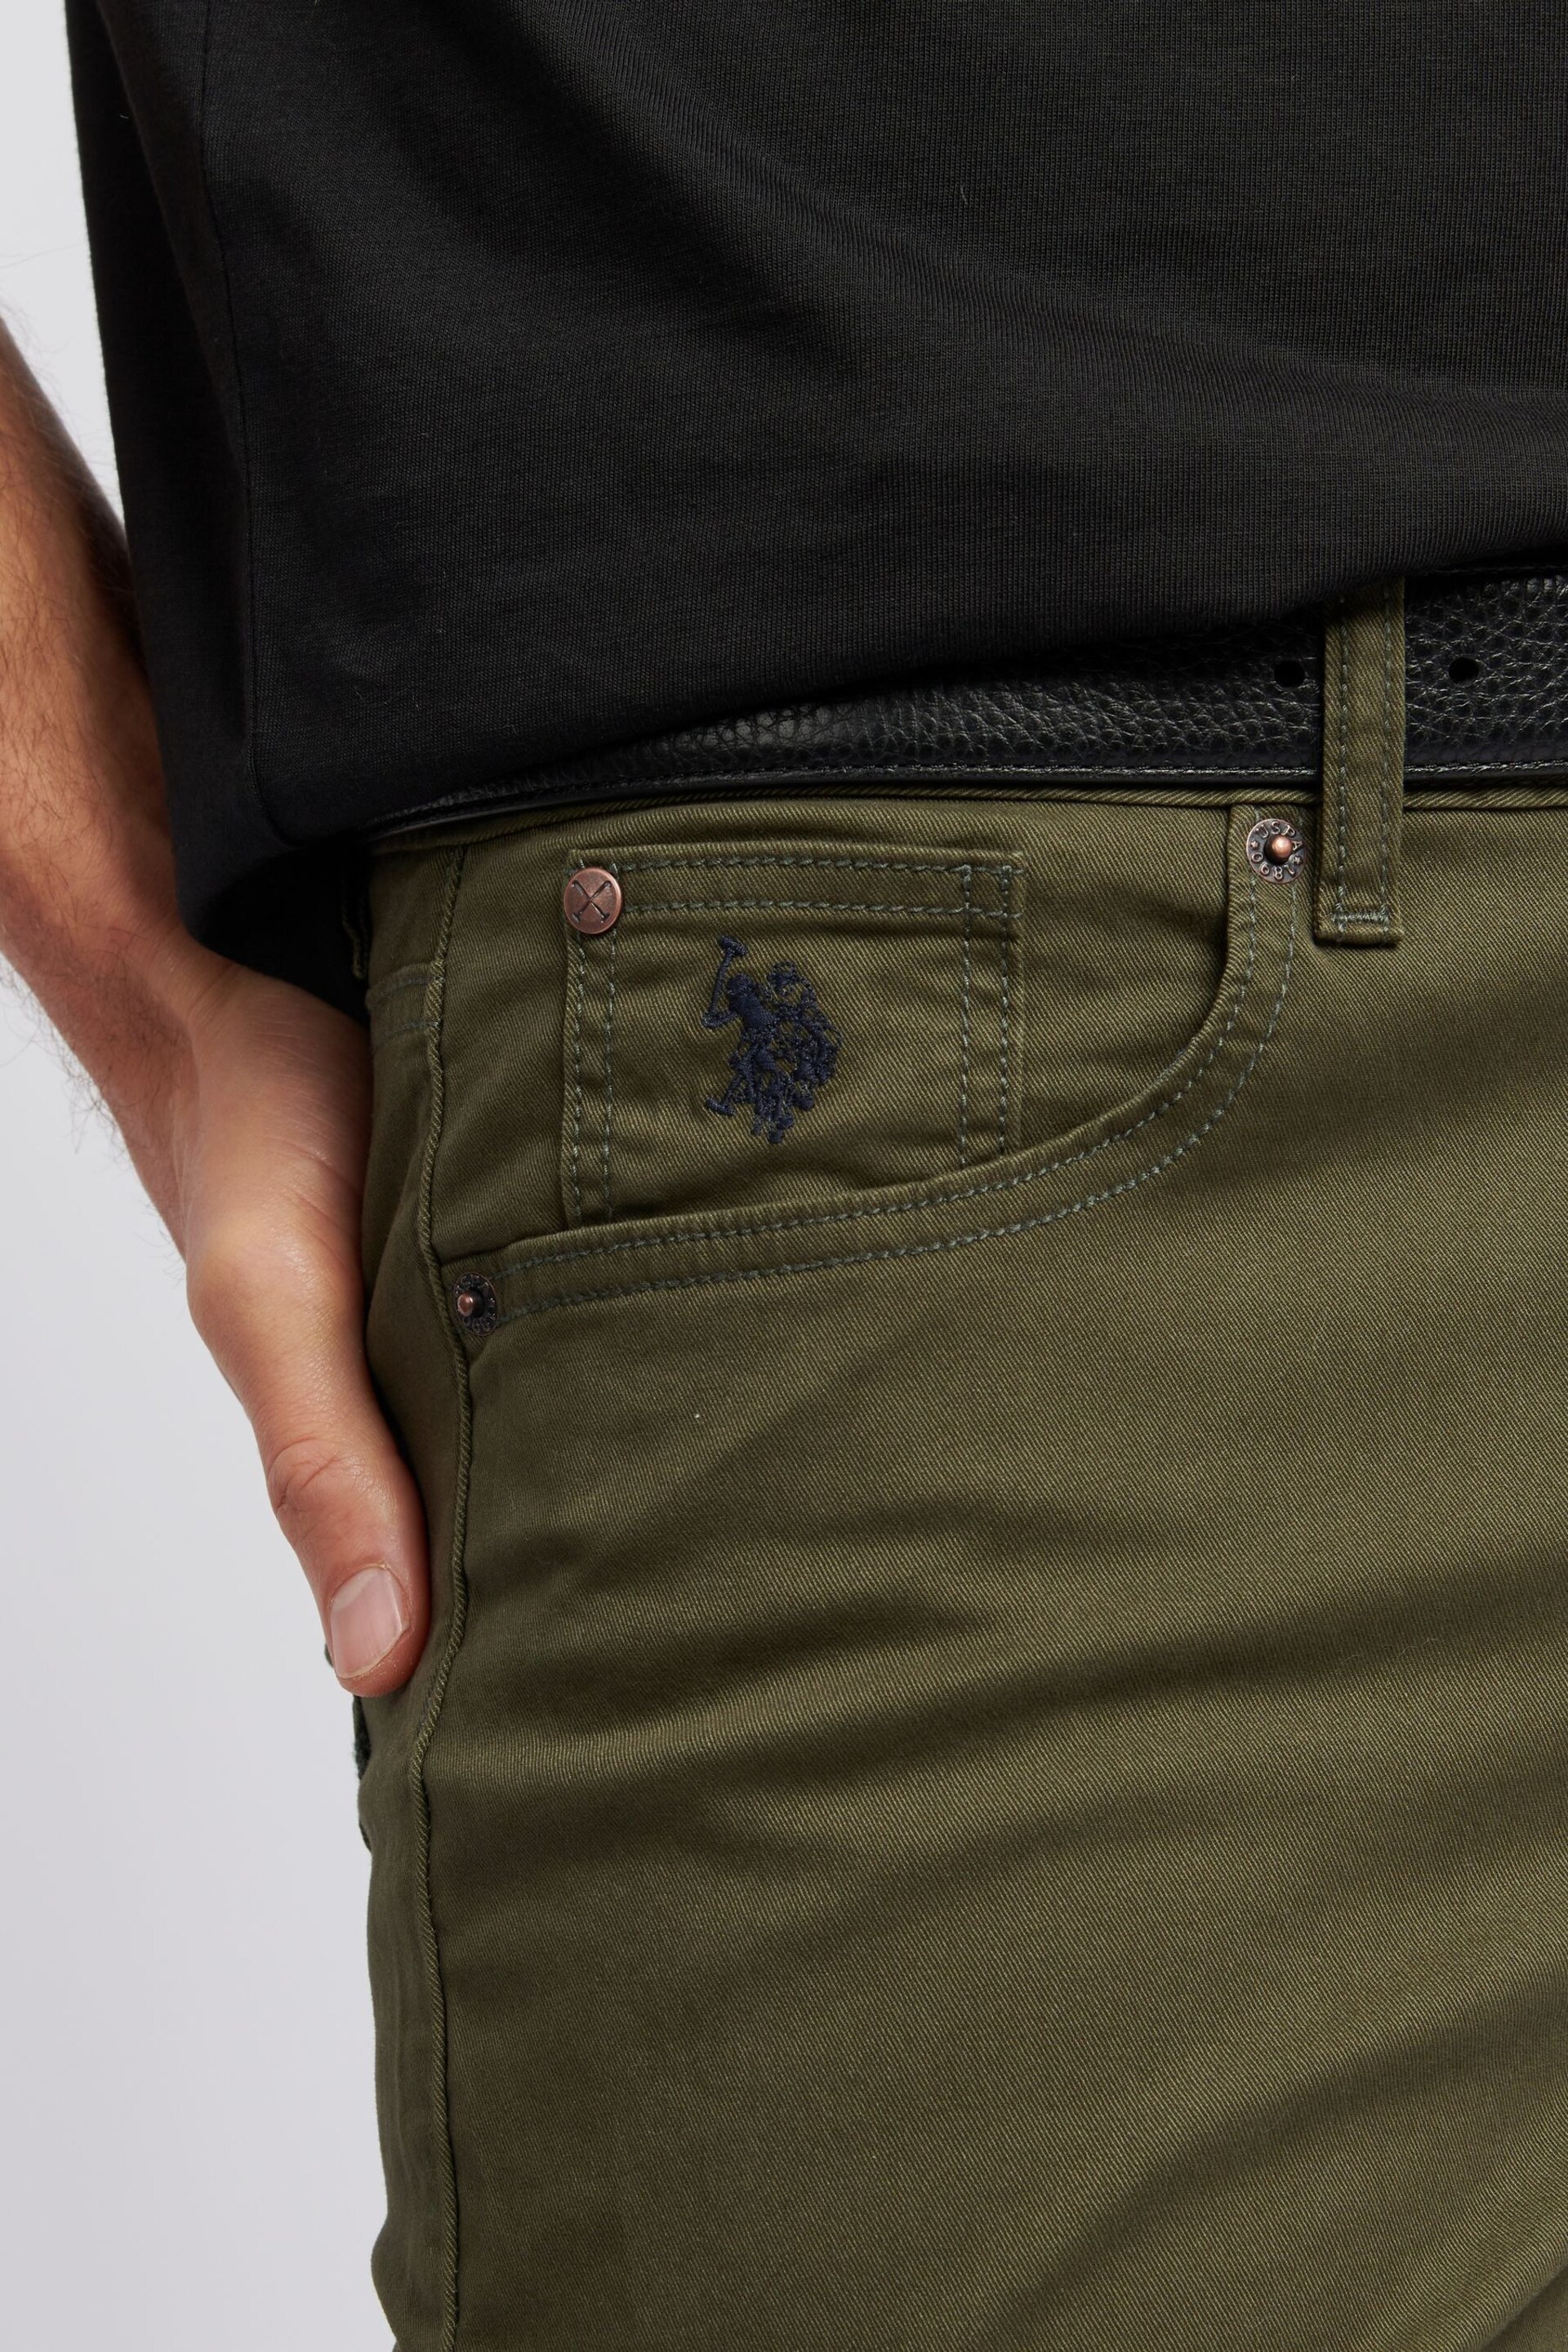 U.S. Polo Assn. Mens Core 5 Pocket Trousers - Image 5 of 9